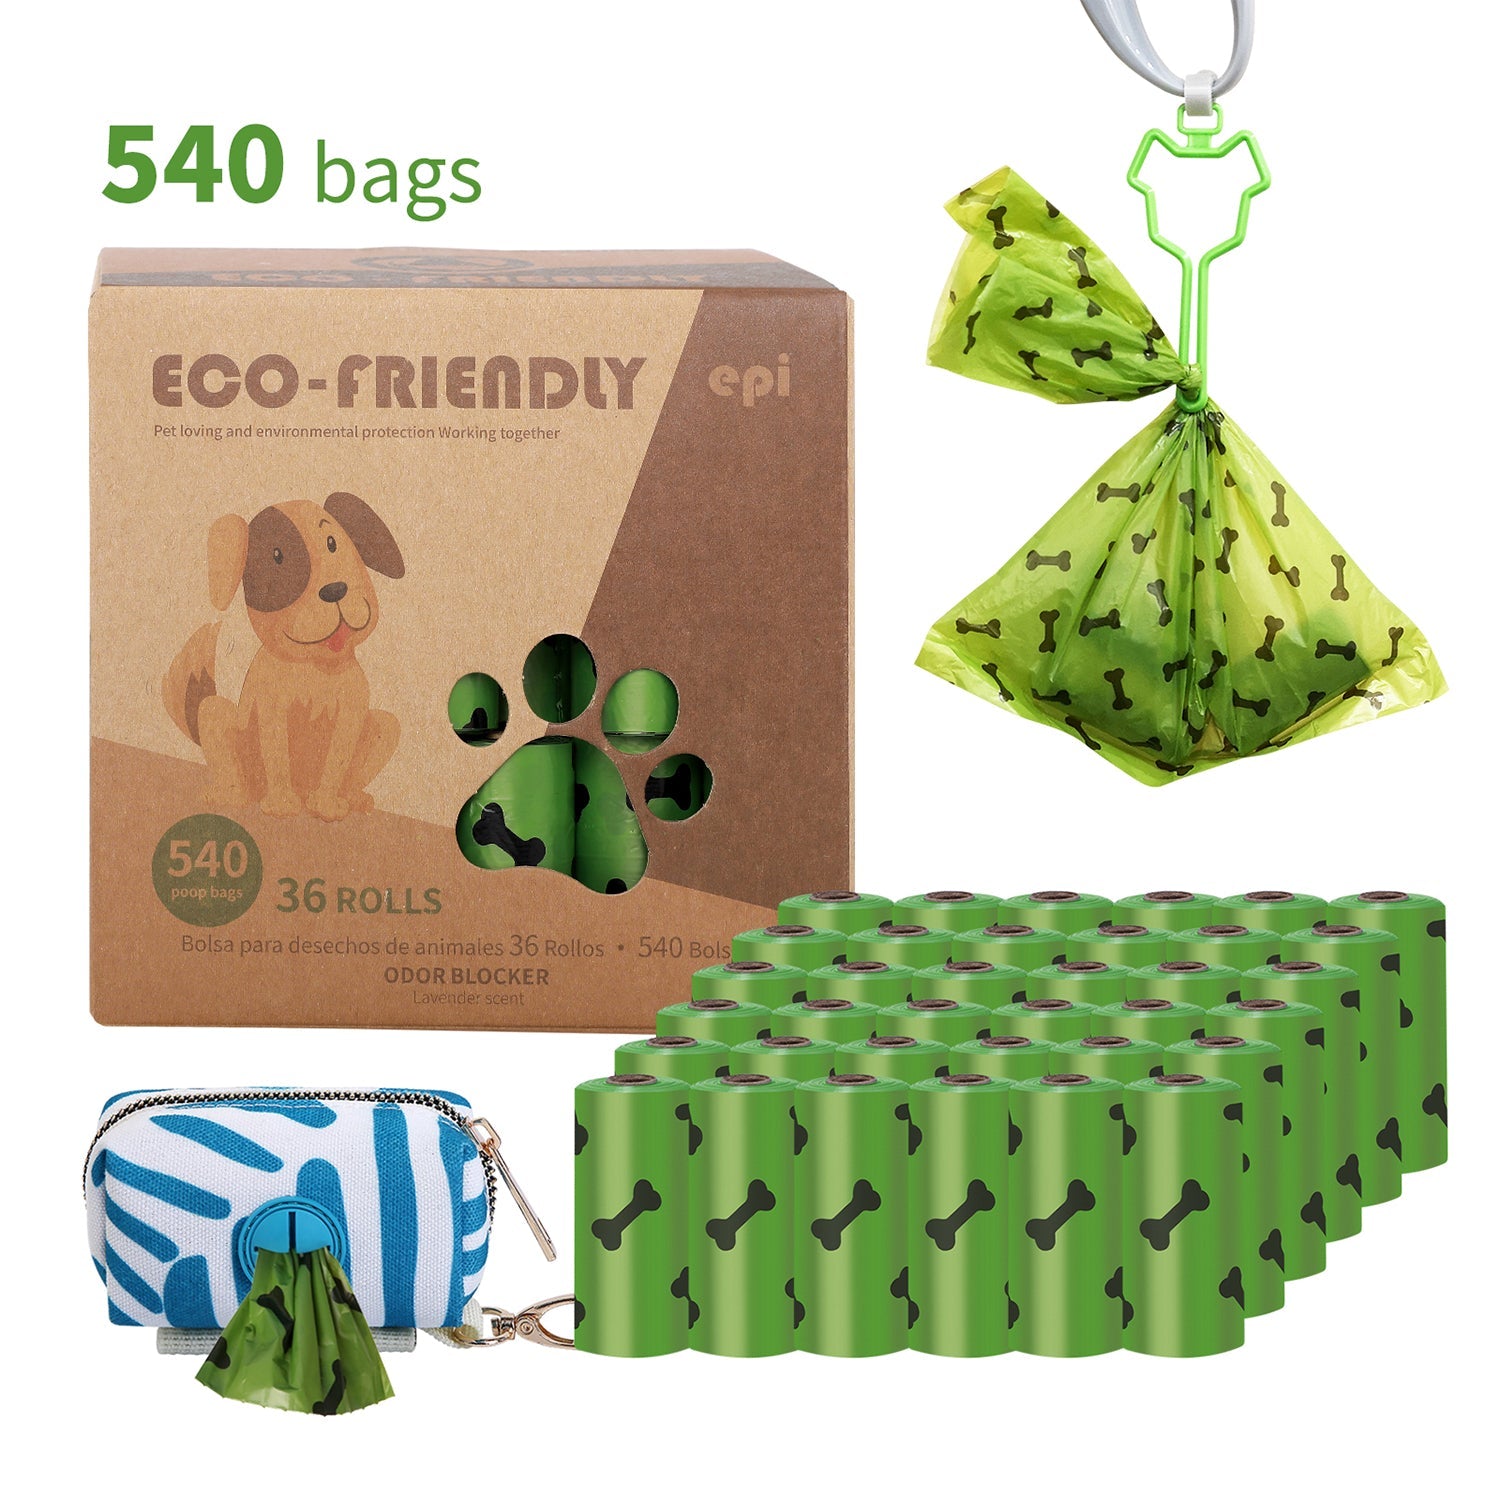 Dog Poop Bags Biodegradable Pets Waste Bag with Dispenser and Leash Clip for Dog Extra Thick 100% Leak Proof Bag 9